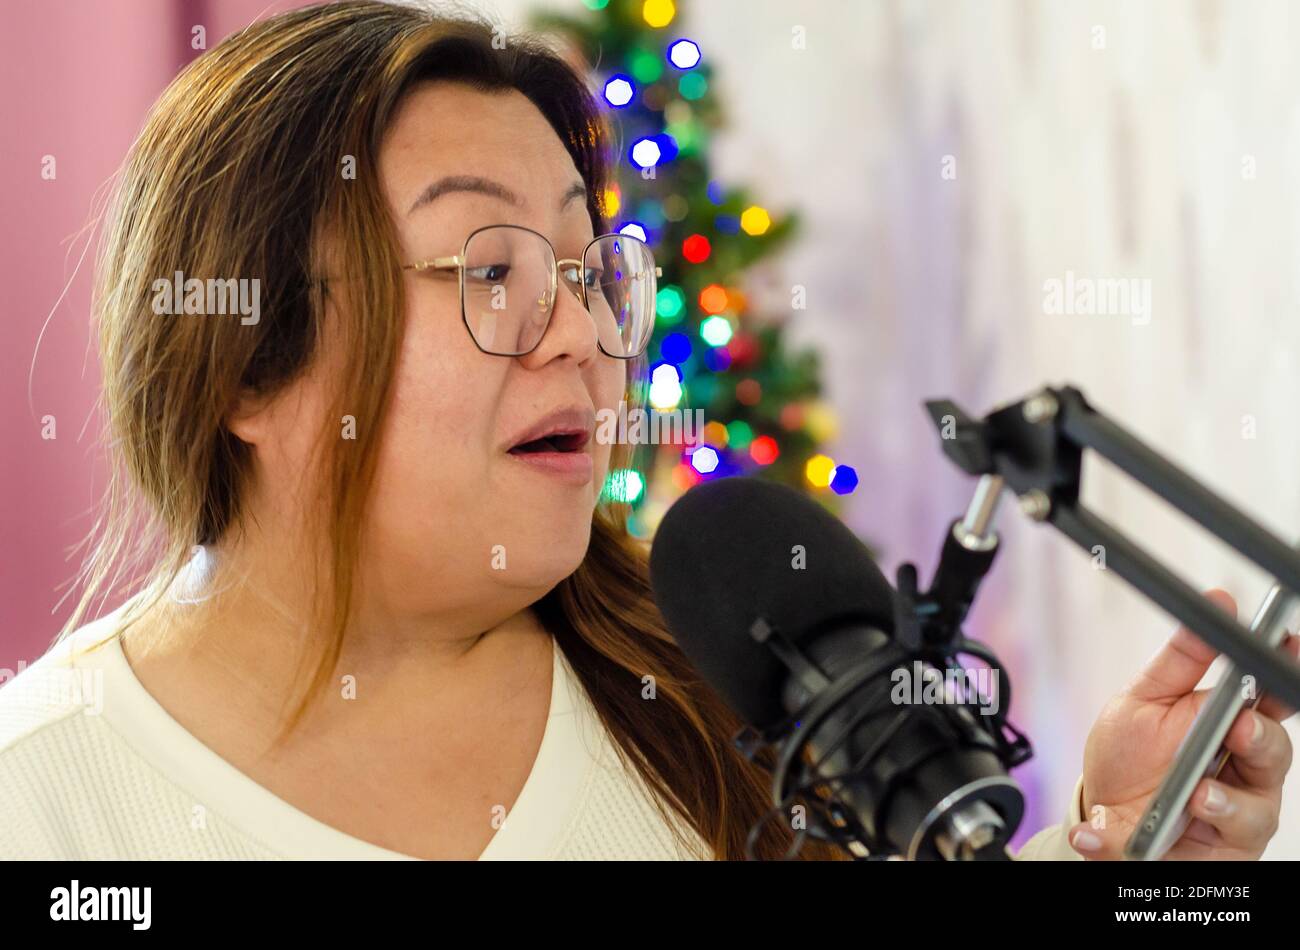 A lady singing into a microphone, recording vocals for a song. Stock Photo